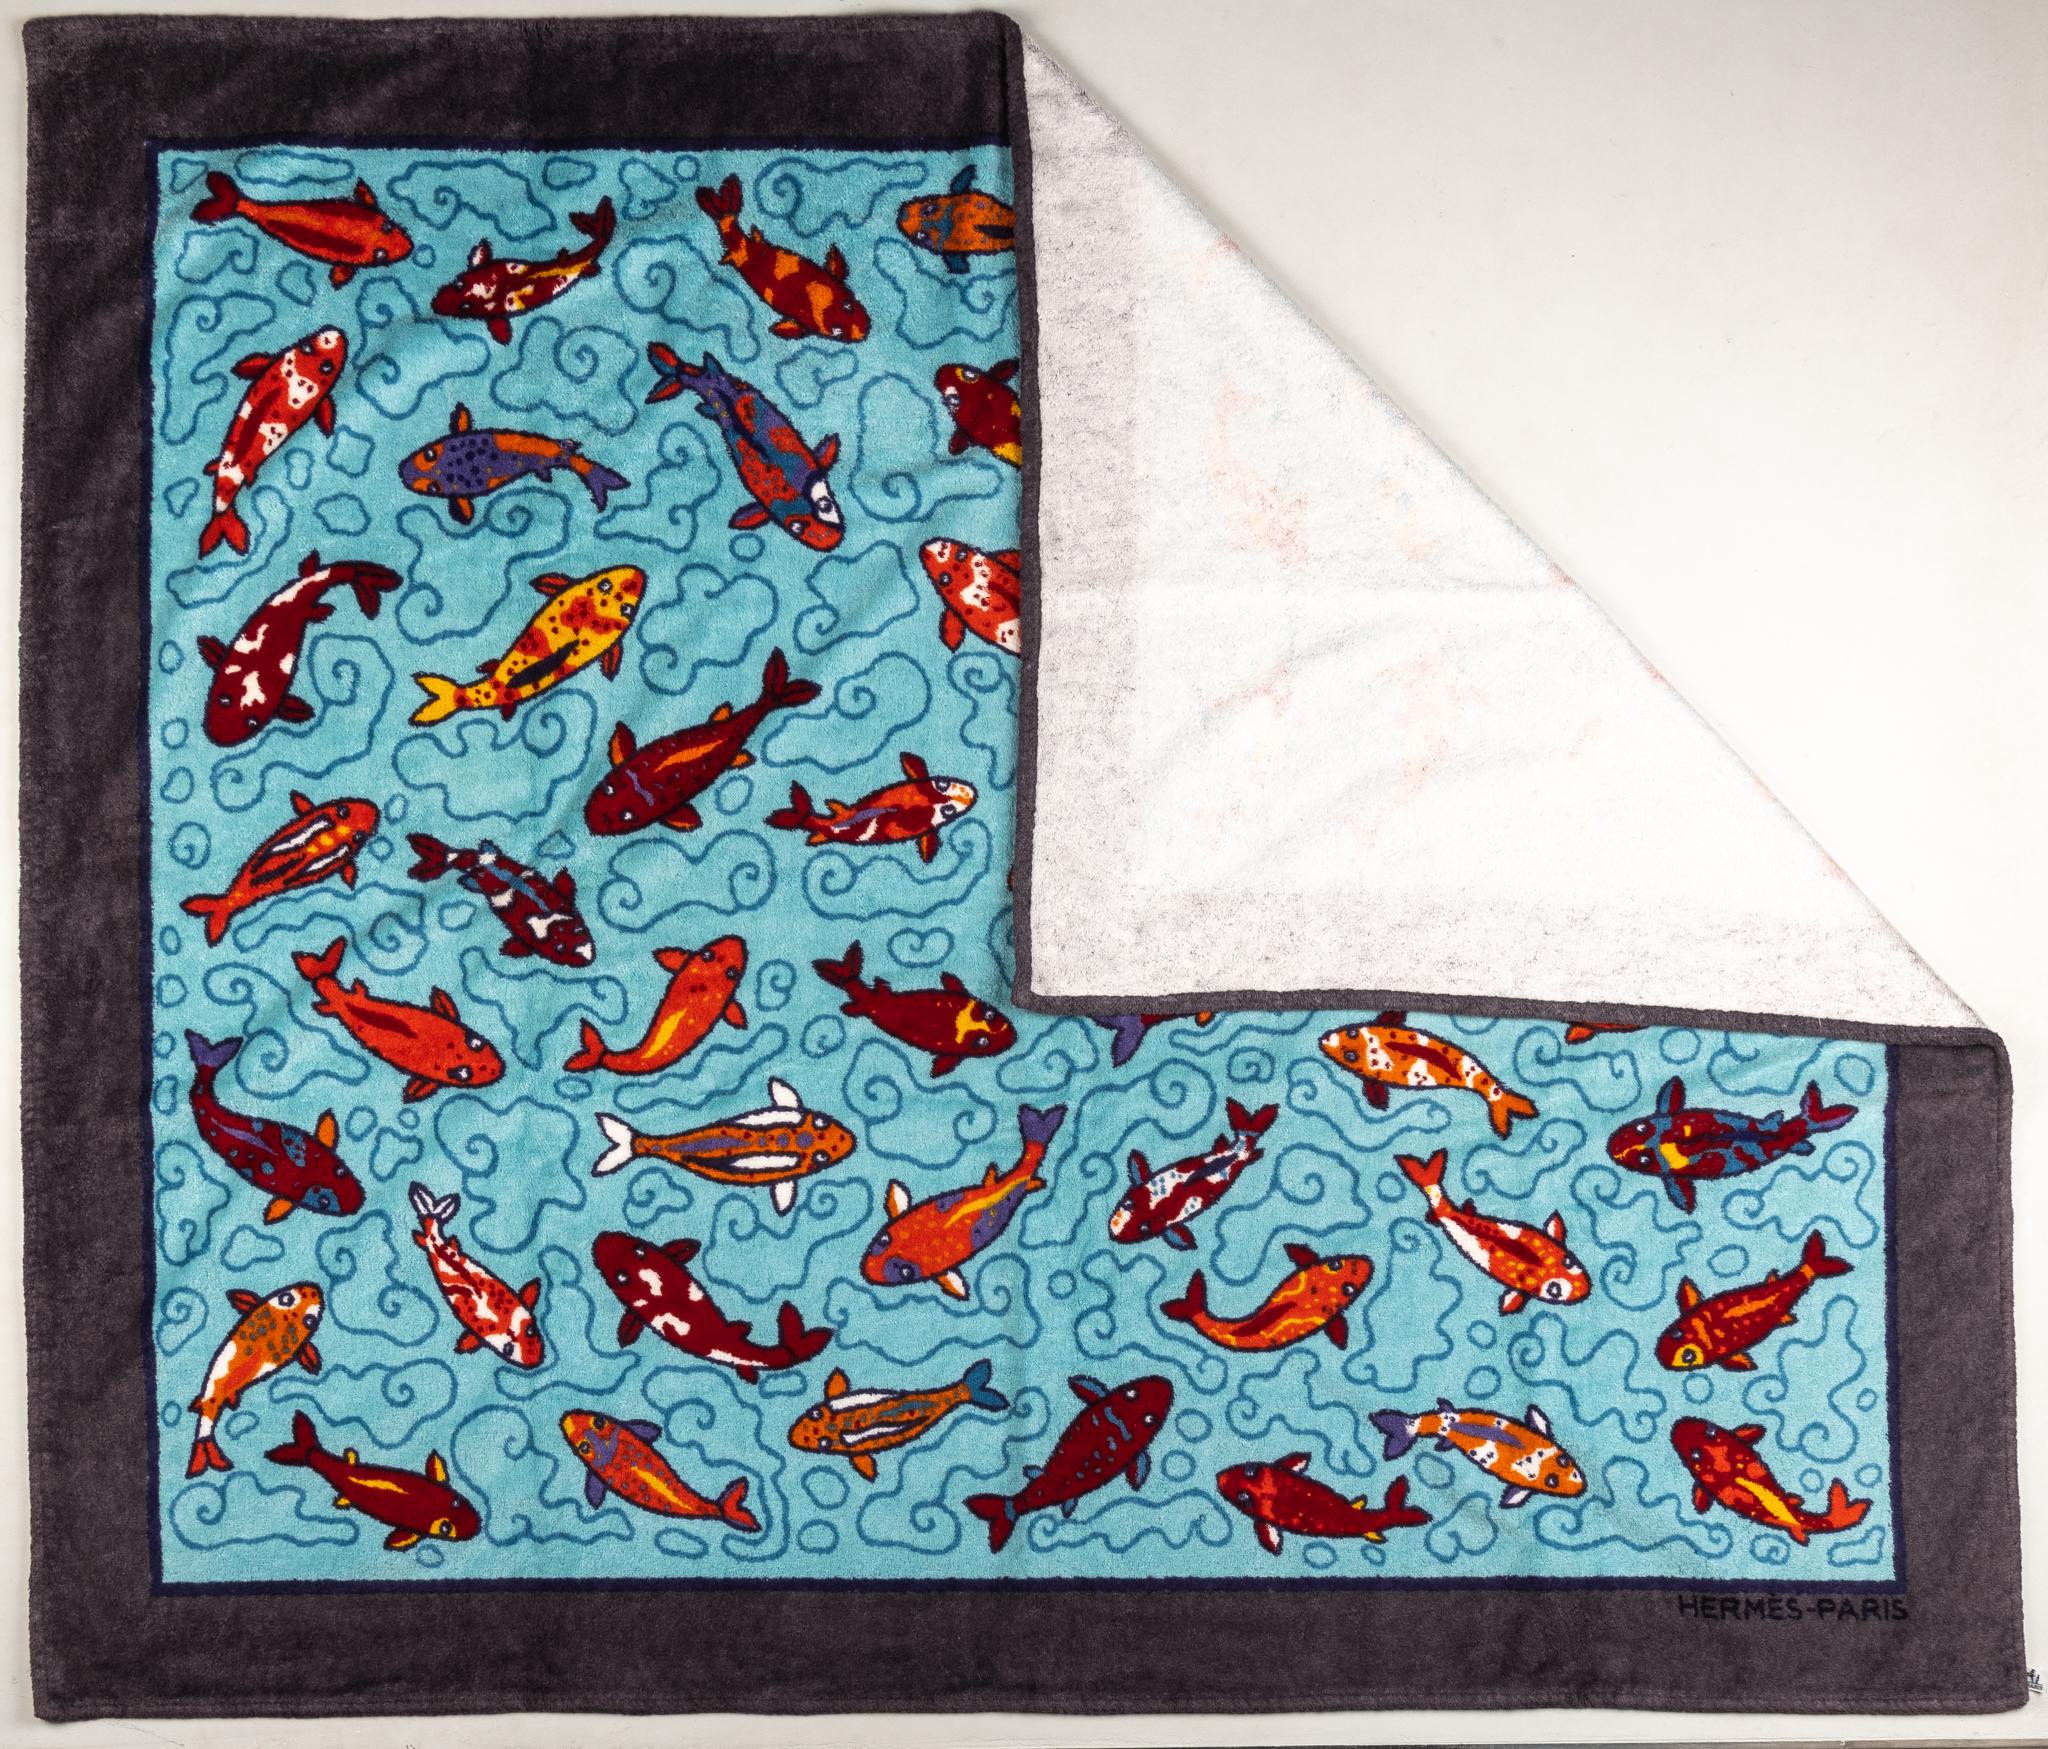 Hermes vintage very collectible beach towel. New condition. 100% cotton terry cloth with koi fish design.